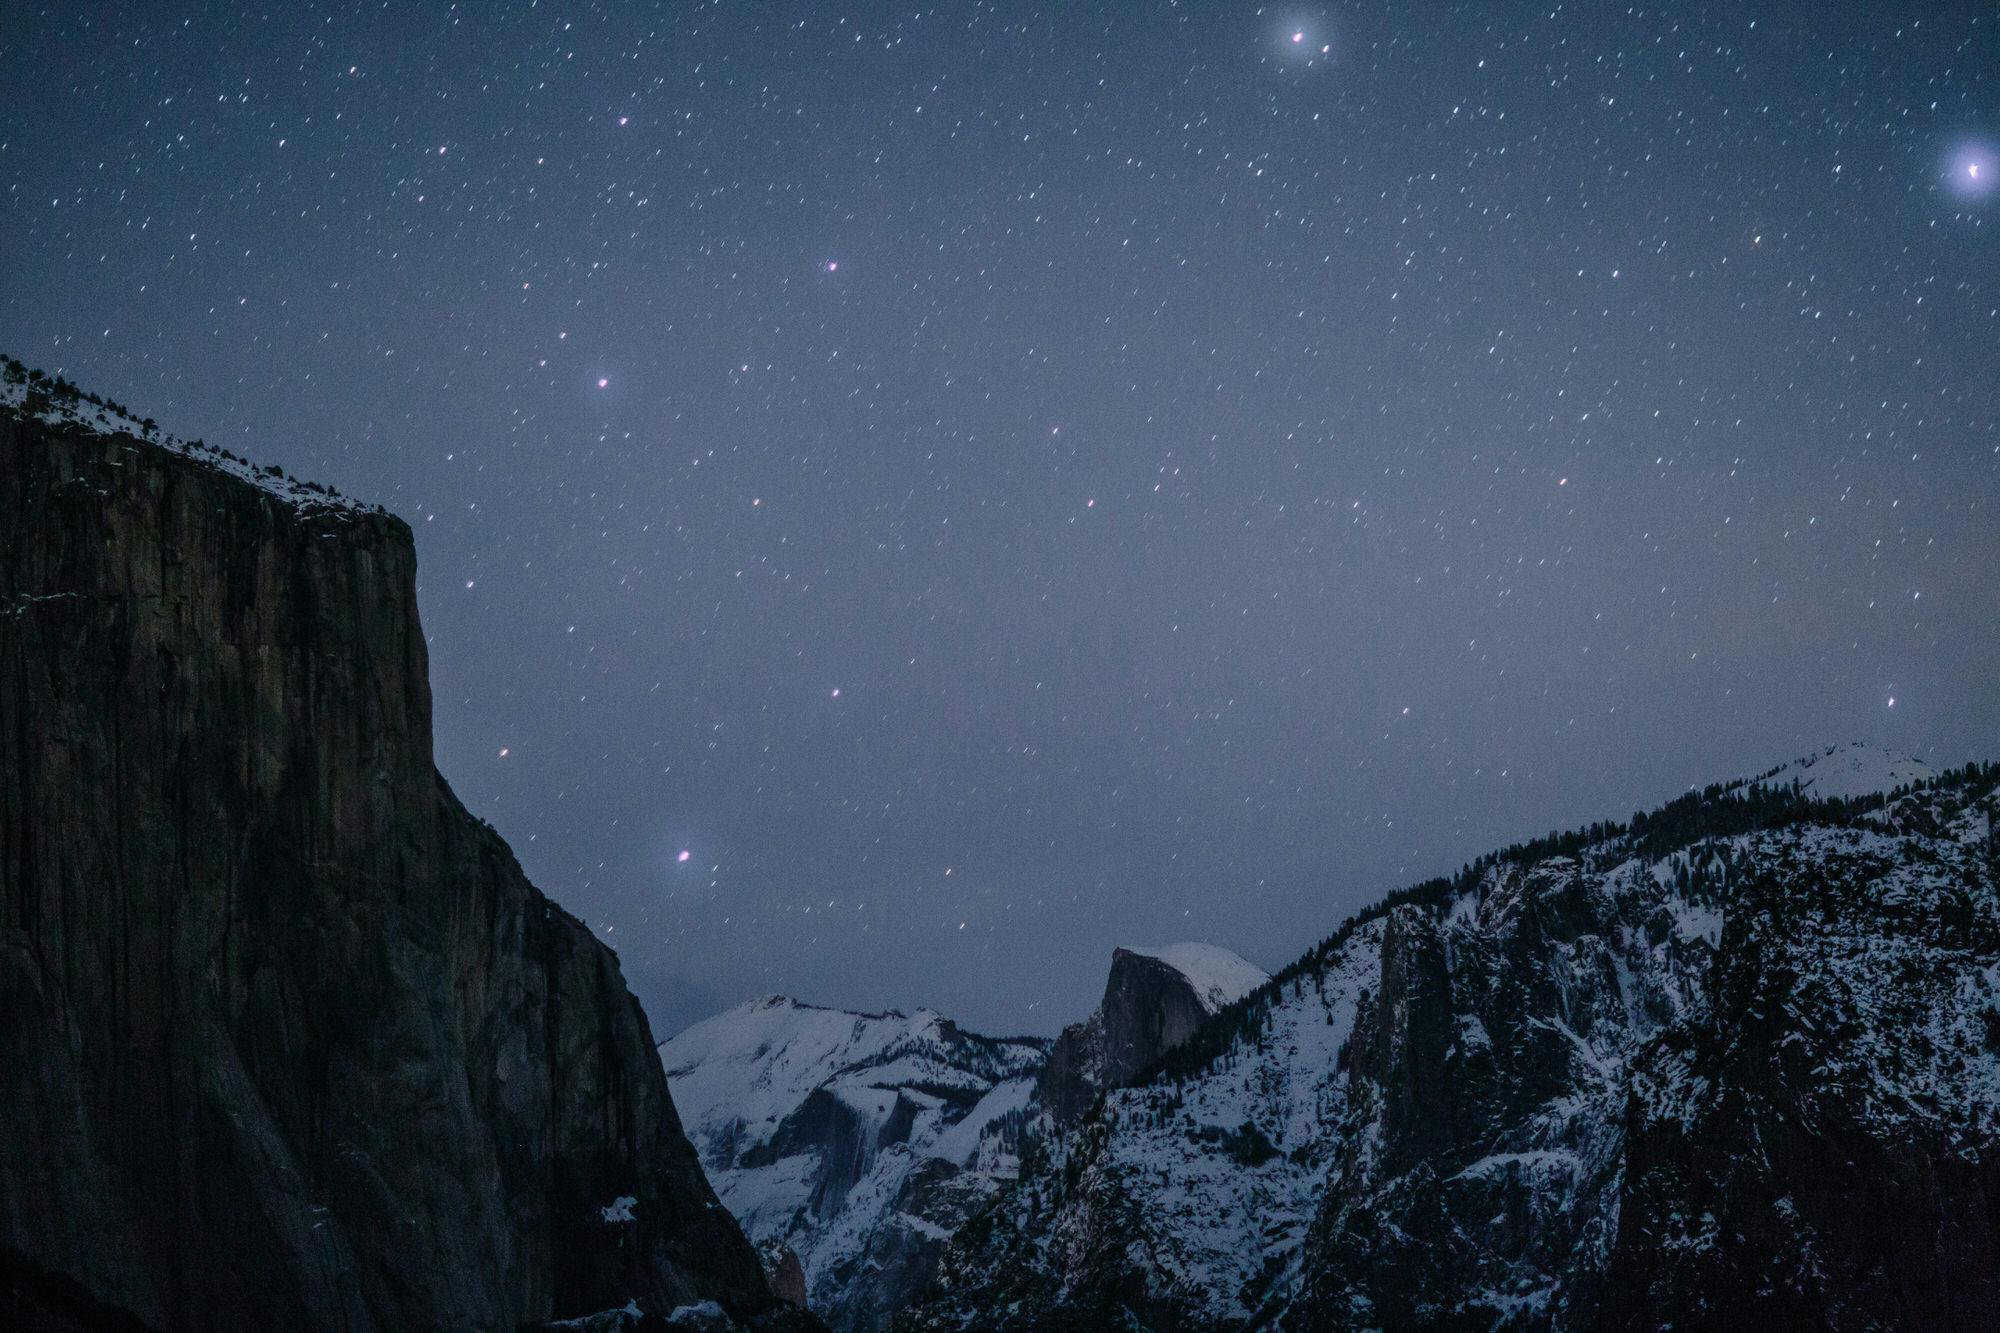 amazing star picture at night in yosemite